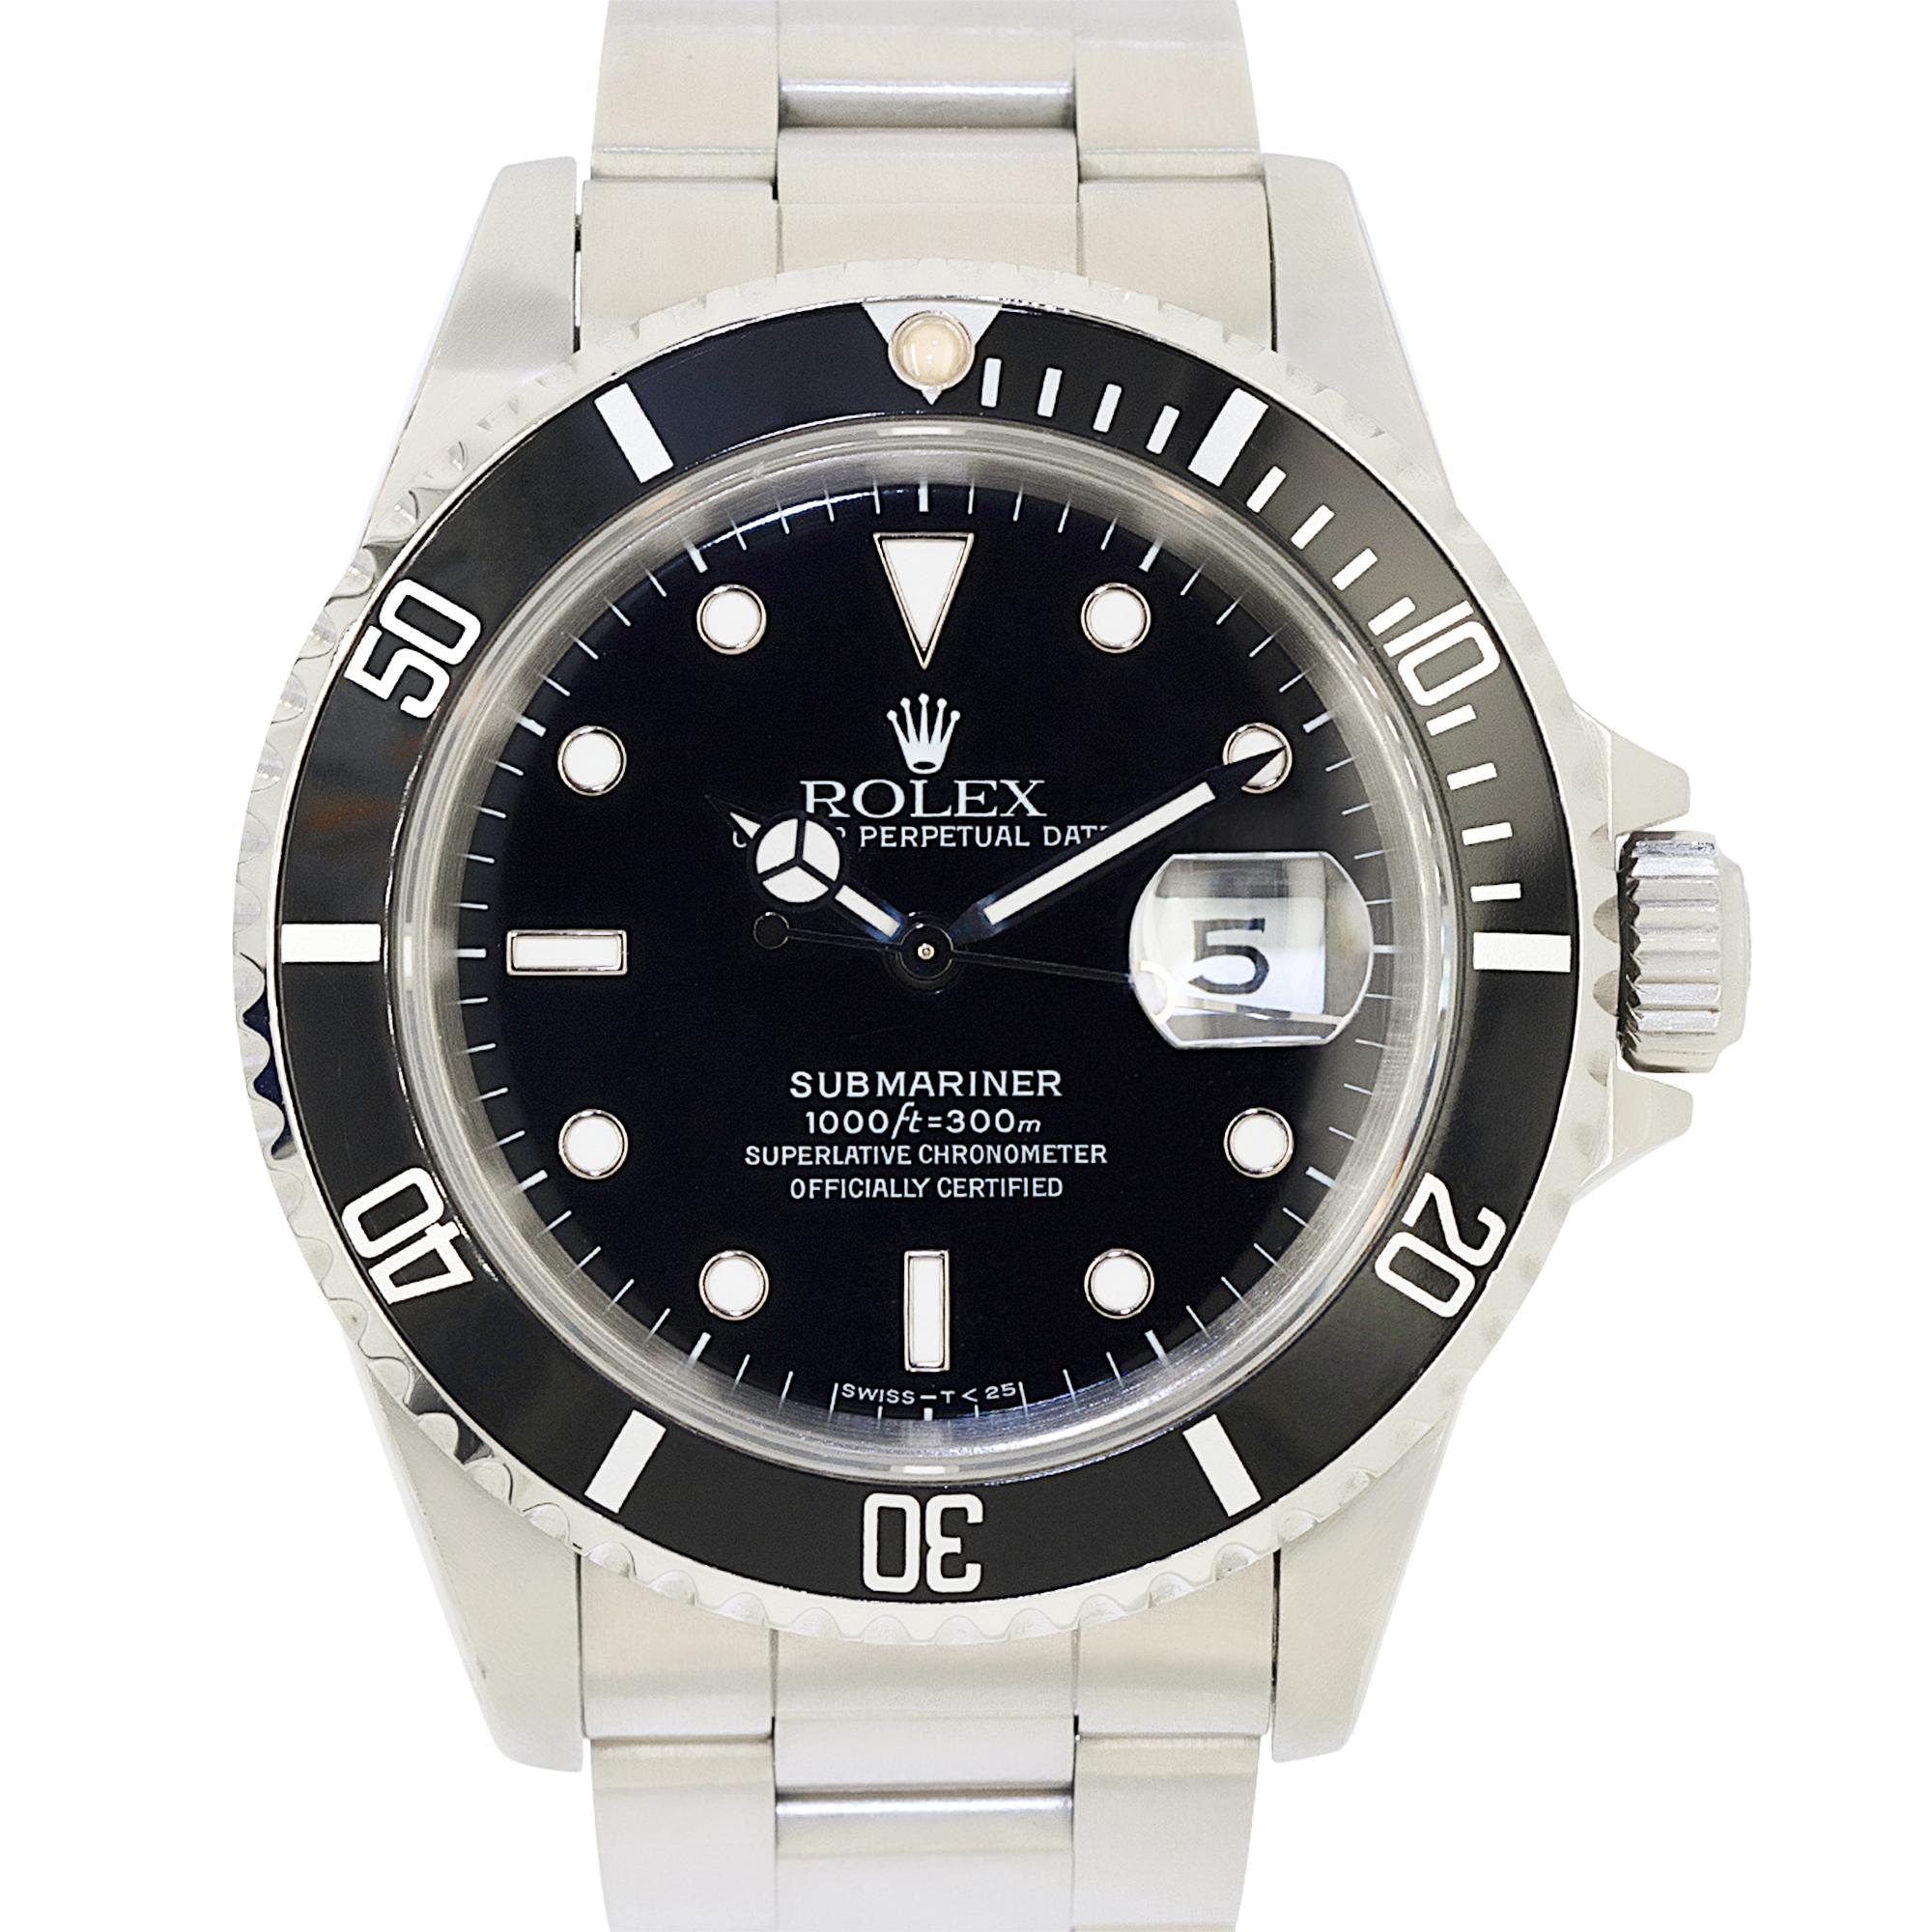 Introducing the iconic Rolex Submariner, a true symbol of timeless style and reliability. Crafted with stainless steel, this timepiece features a 40mm case and a scratch-resistant sapphire crystal for durability. The unidirectional stainless steel